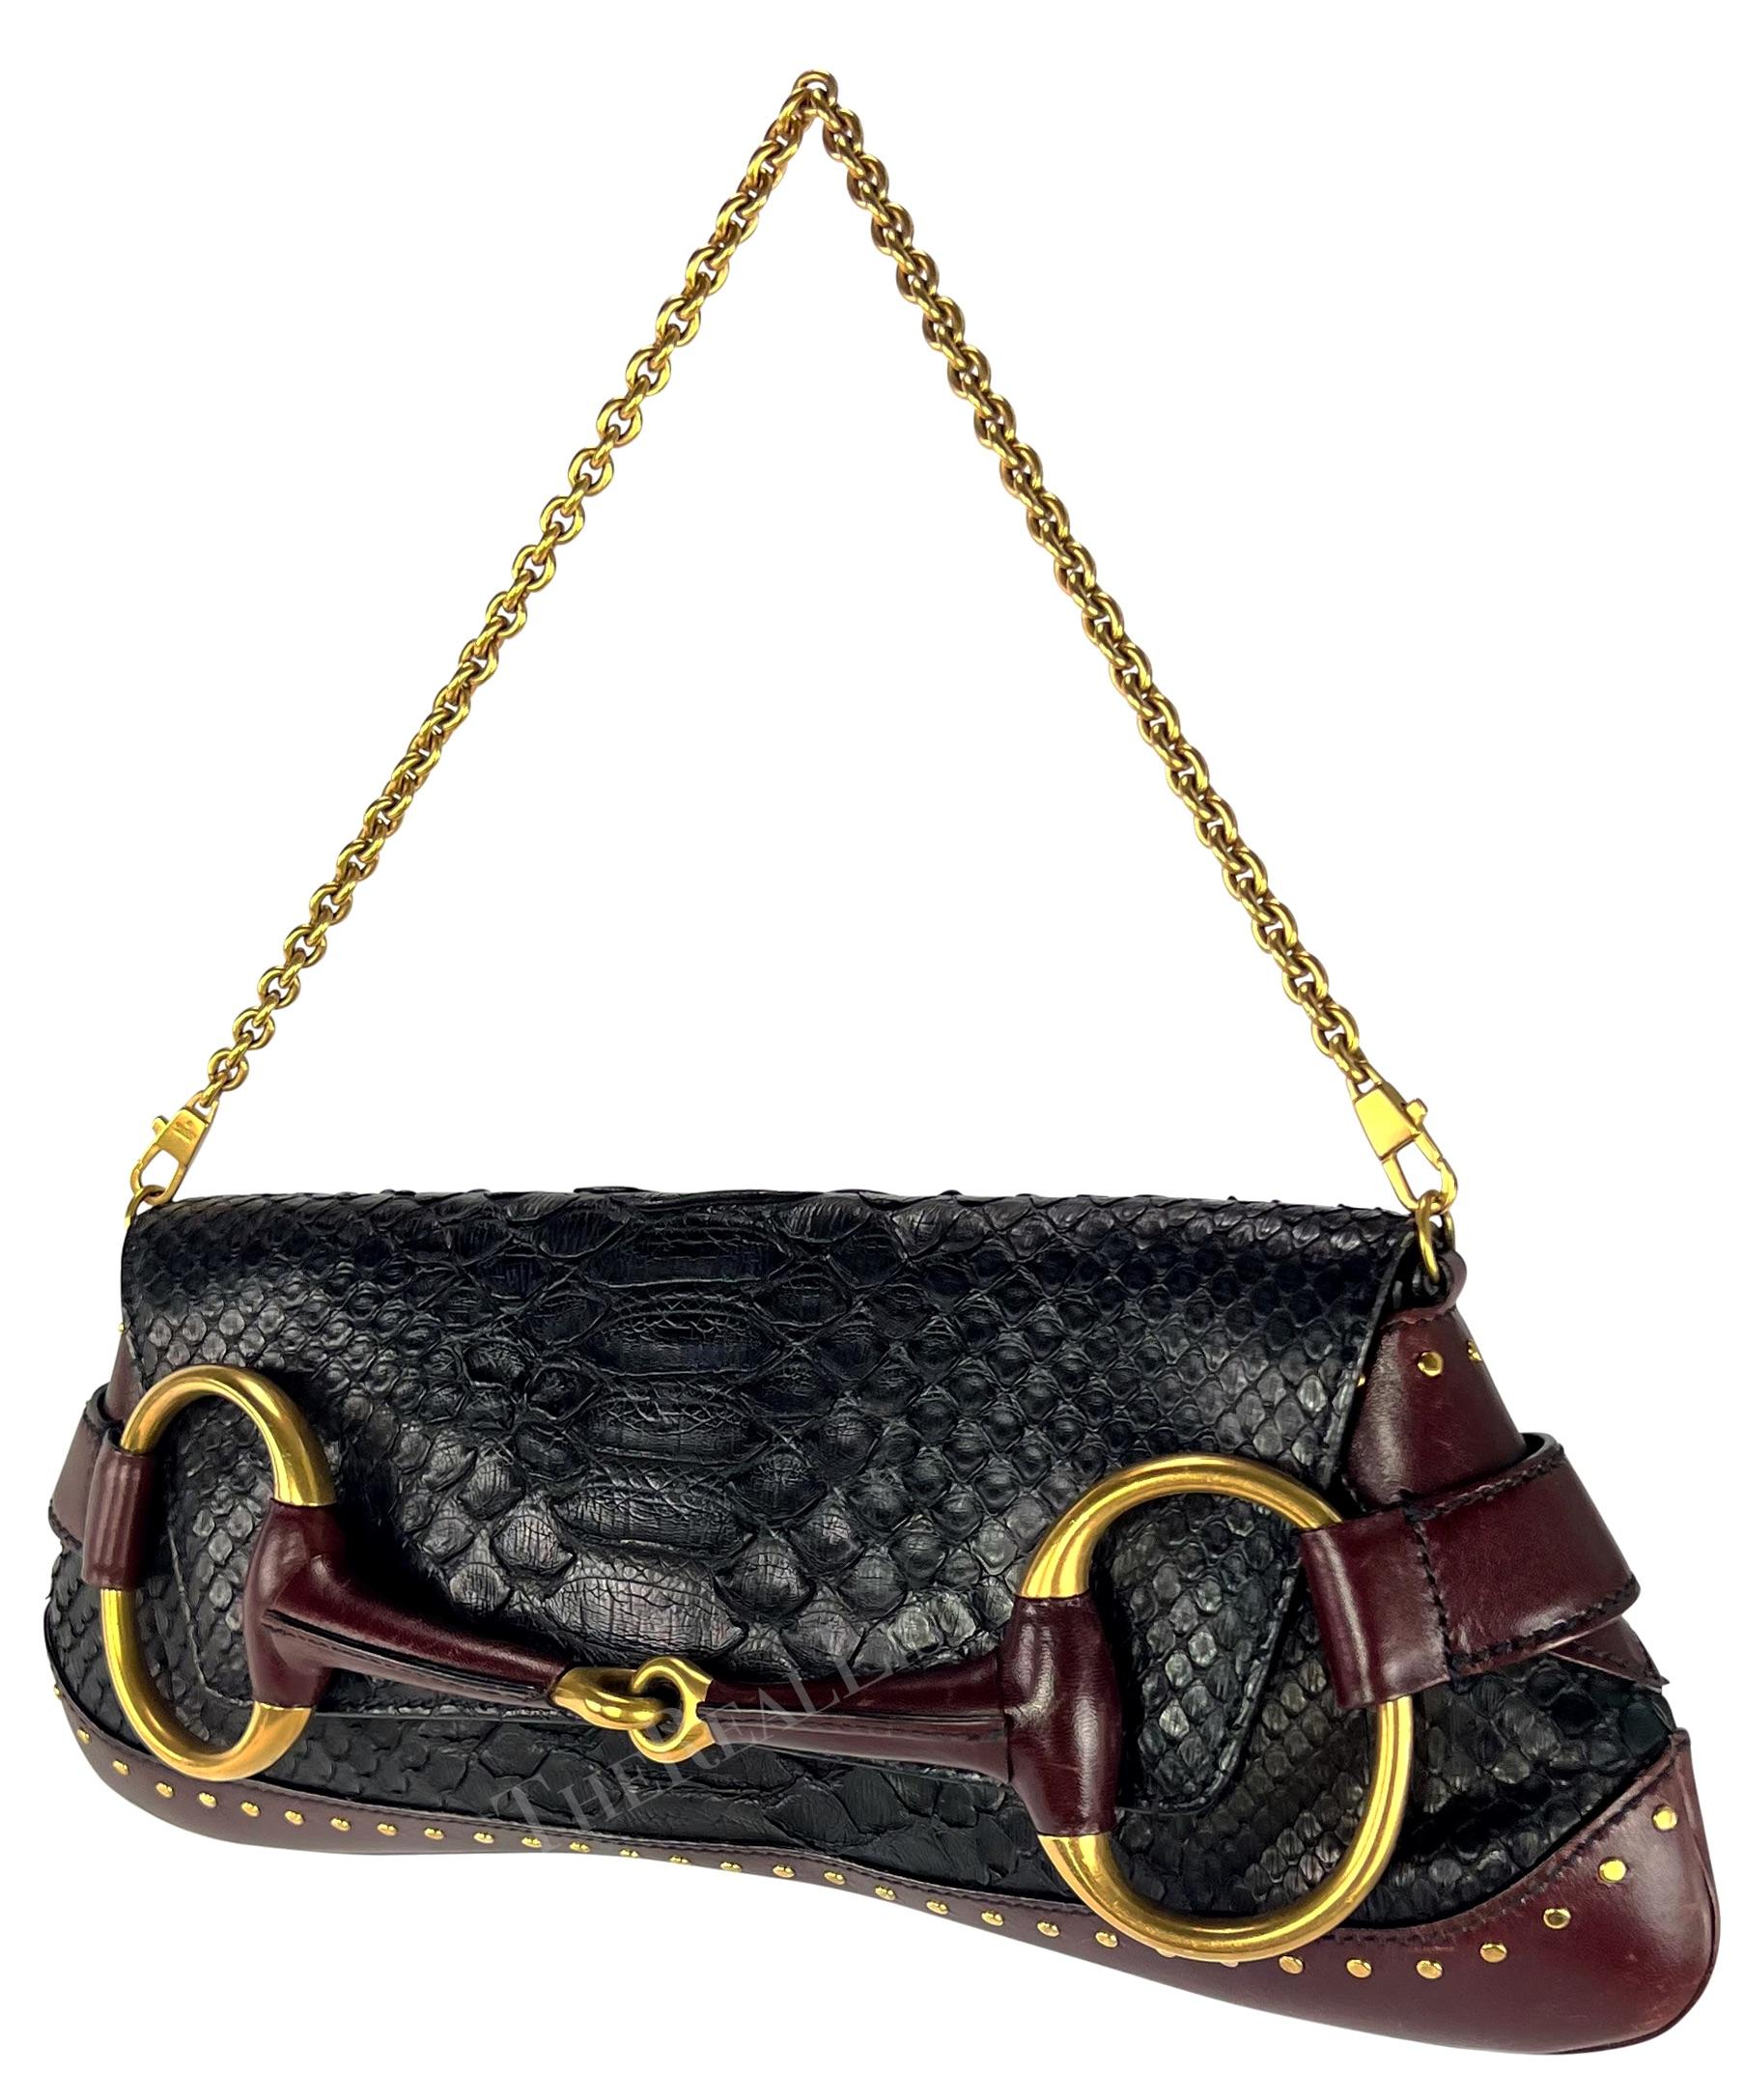 TheRealList presents: a fabulous black python Gucci horse bit bag, designed by Tom Ford. From the Fall/Winter 2003 collection, this horse bit style bag is constructed of black python skin with burgundy leather accents. The bag features a flap